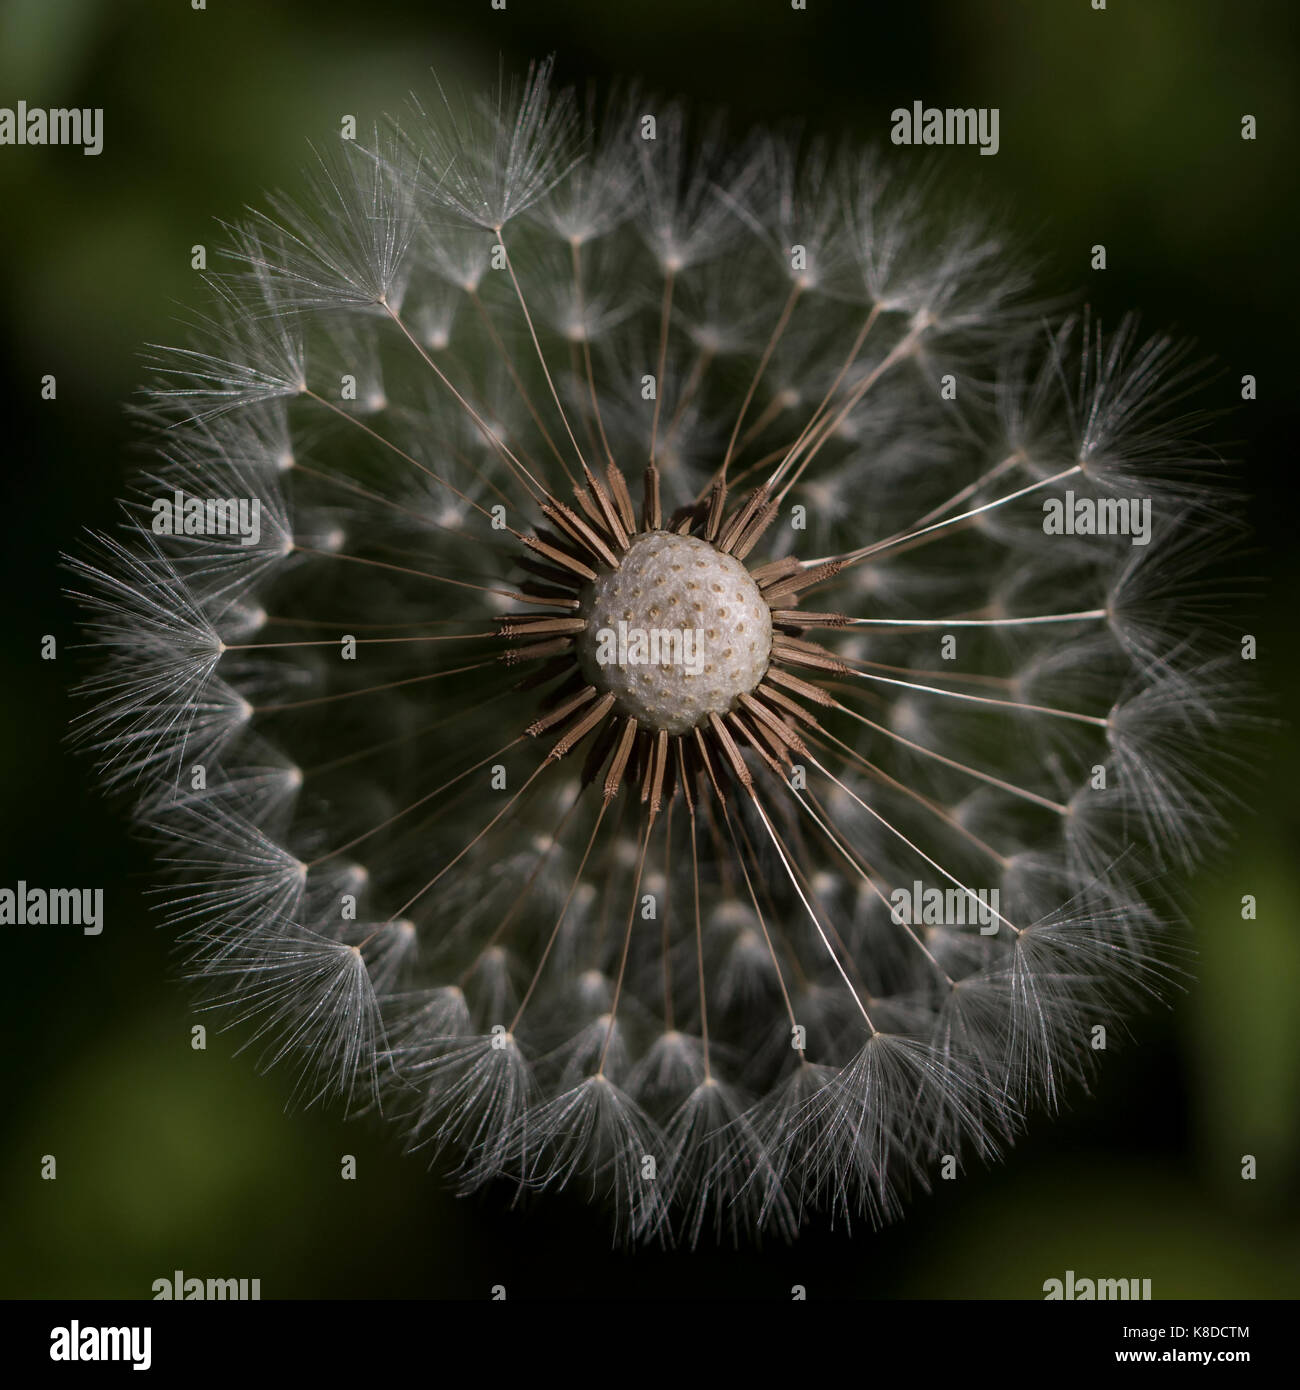 Macro shot looking down on to a dandelion clock with it's top half missing. An attractive abstract pattern with a blurred dark green  background. Stock Photo